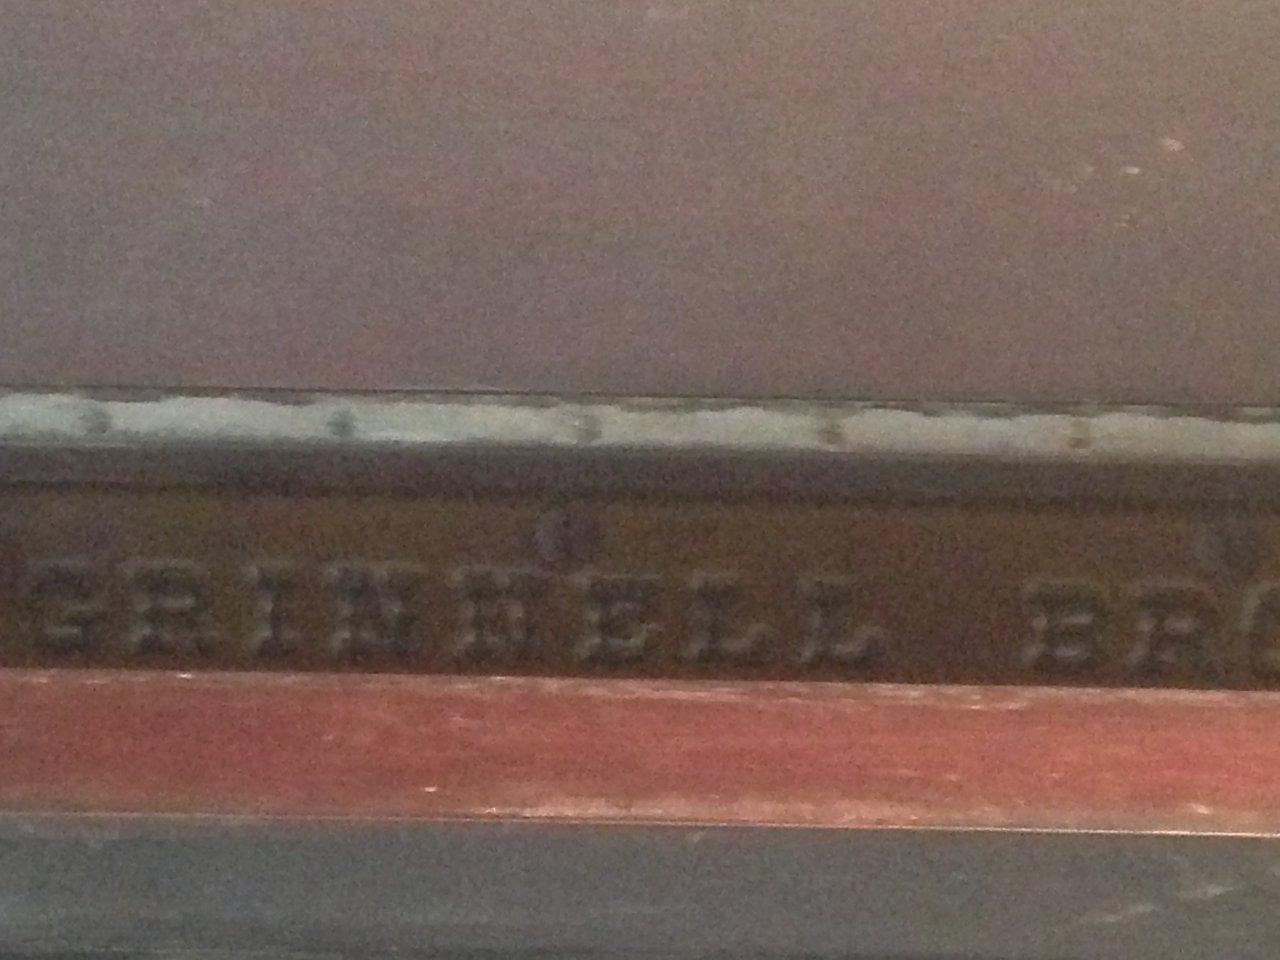 grinnell brothers piano serial number